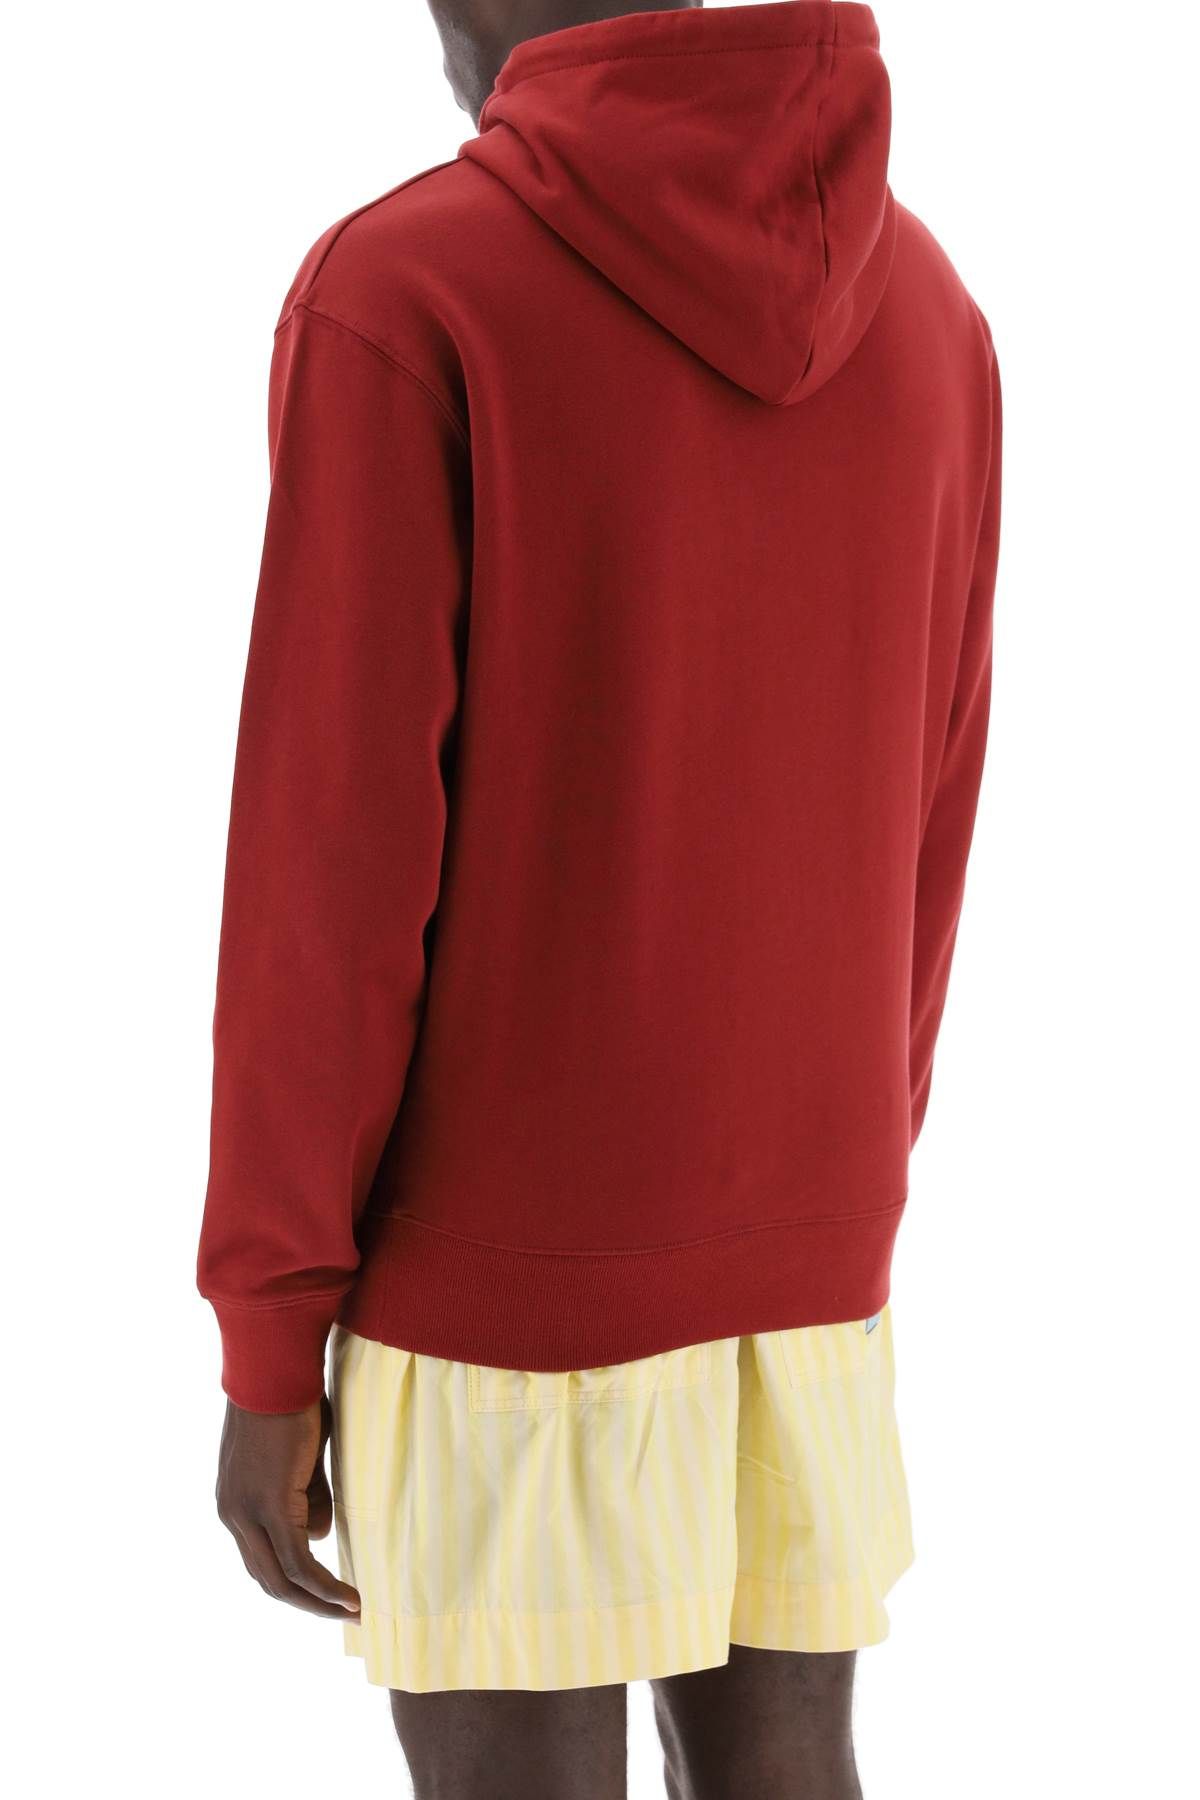 Shop Maison Kitsuné Hooded Sweatshirt With Graphic Print In Red